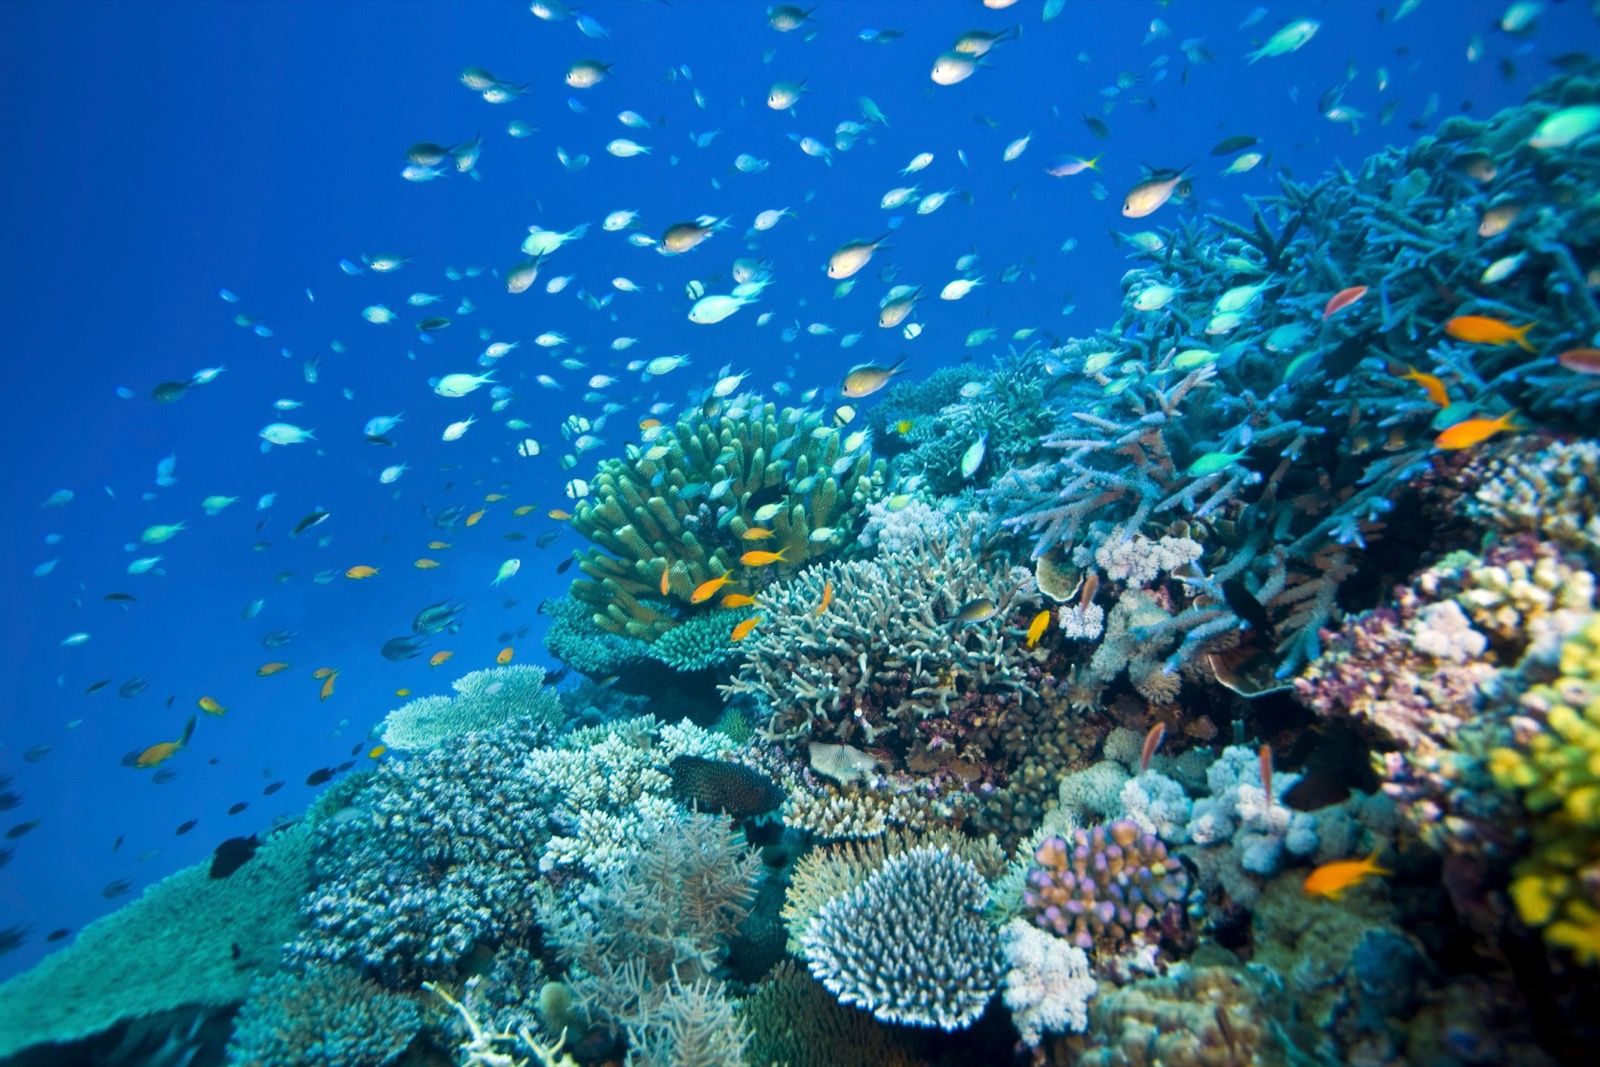 We Know How Brave You Are Based on the Adventurous Activities You Are Willing to Take Part in Great Barrier Reef, Australia Fish Underwater Ocean